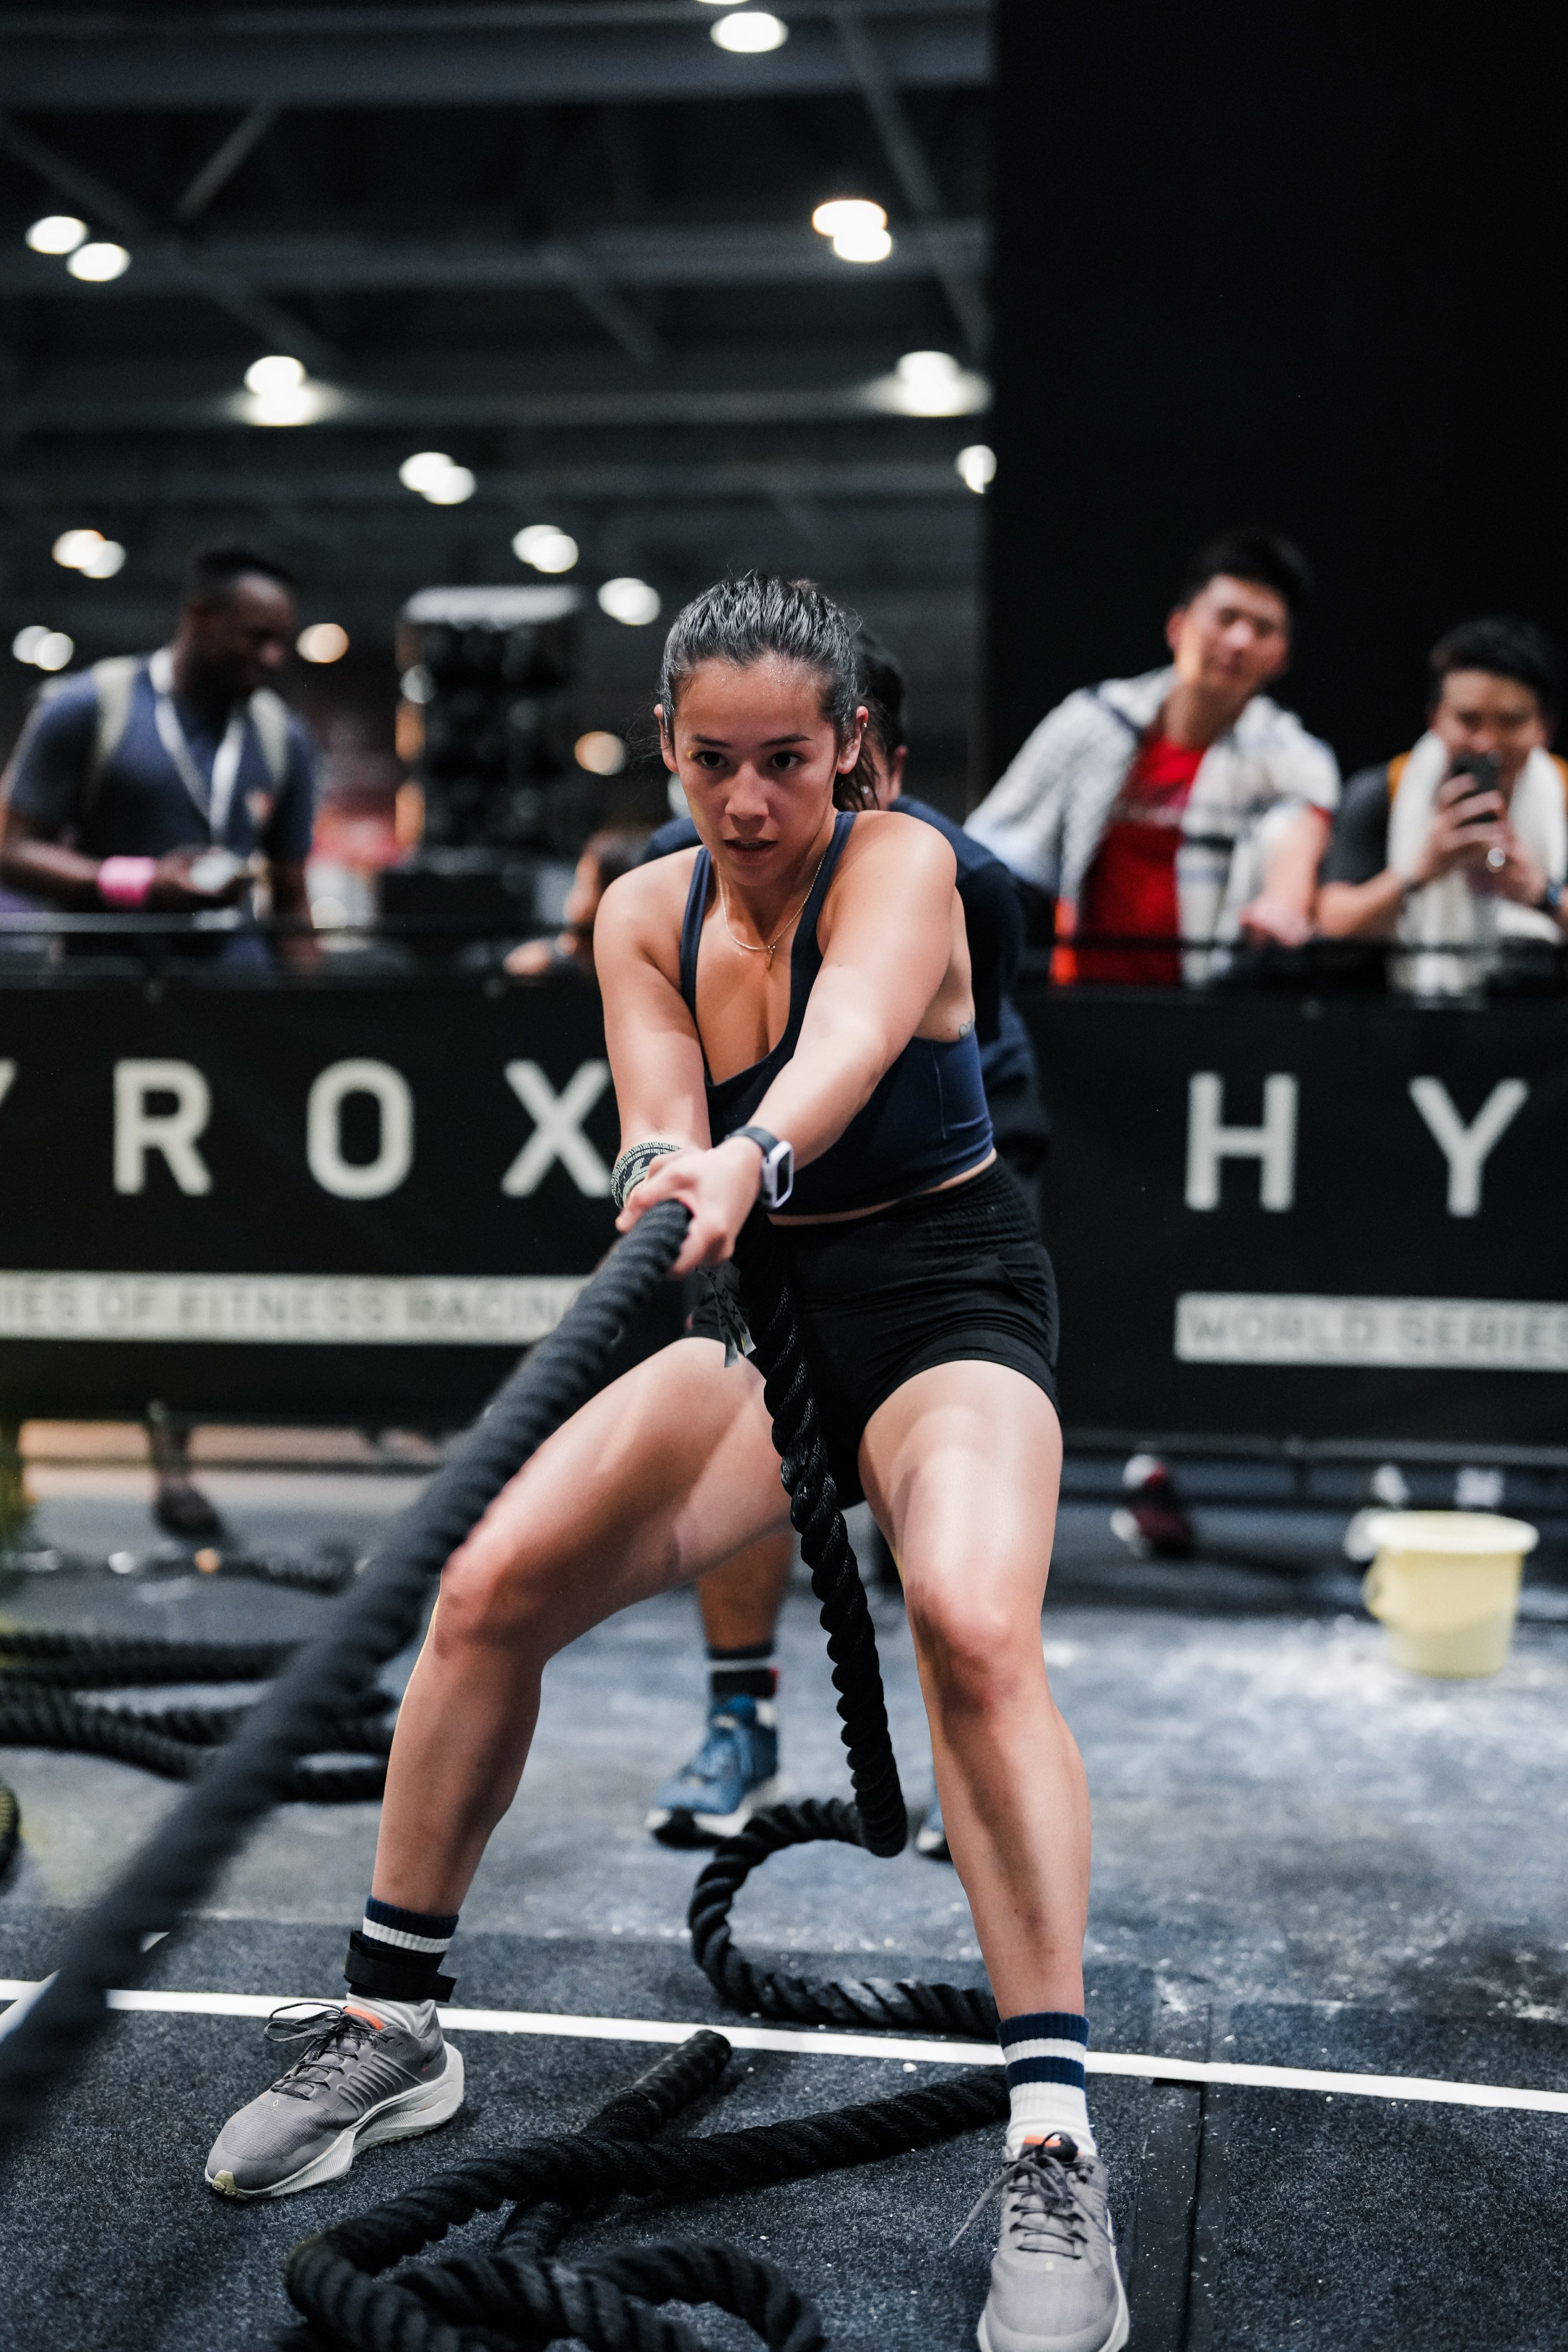 Hyrox is a top draw for the coming Fitness and Wellness Expo at AsiaWorld-Expo in Hong Kong, which will also feature dancing, yoga, deadlifting, weight-loss tips, ninja courses, traditional Chinese medicine, and much more. Photo: Fitness and Wellness Expo